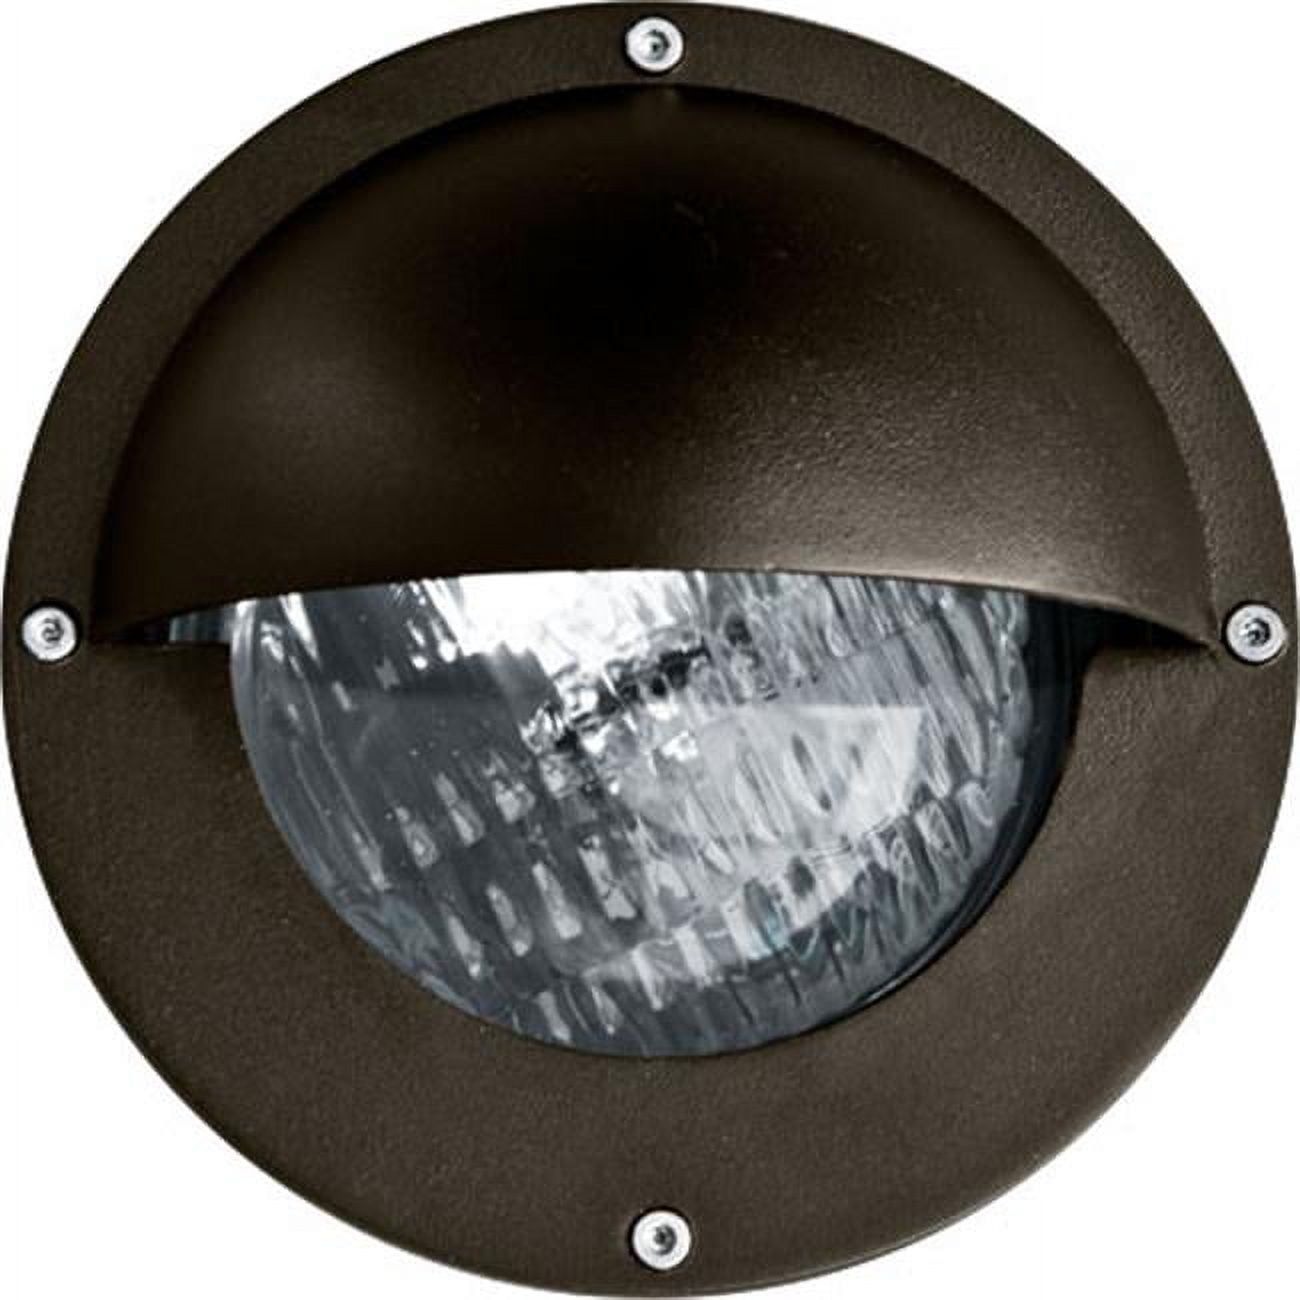 Picture of Dabmar Lighting LV609-BZ Cast Aluminum Recessed Brick, Step & Wall Light with Eyelid, Bronze - 6.06 x 6.06 x 6.25 in.